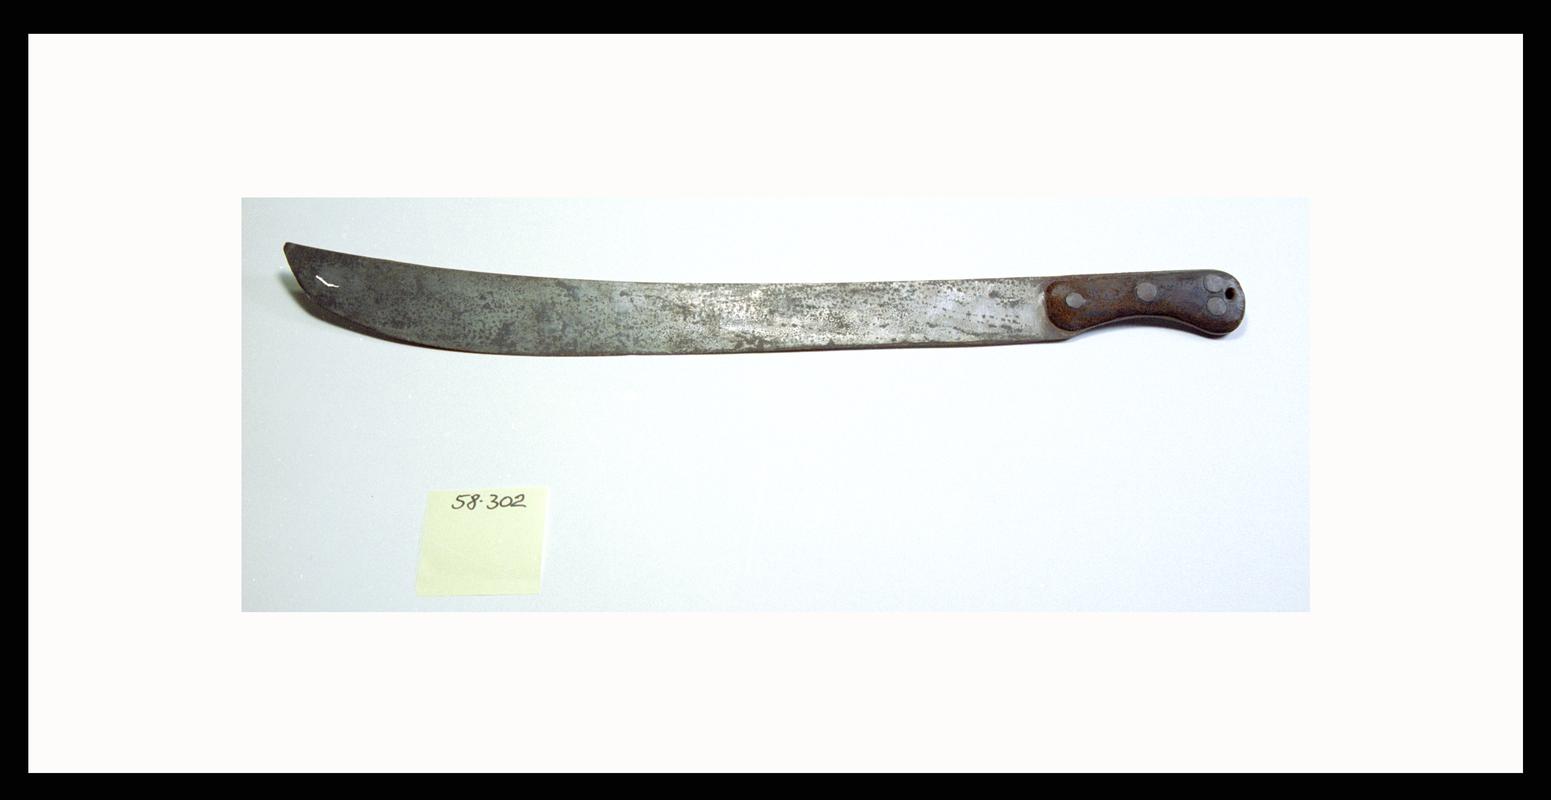 Opener's knife ('hangar') as used at Old Castle Tinplate Works, Llanelly, c.1950.